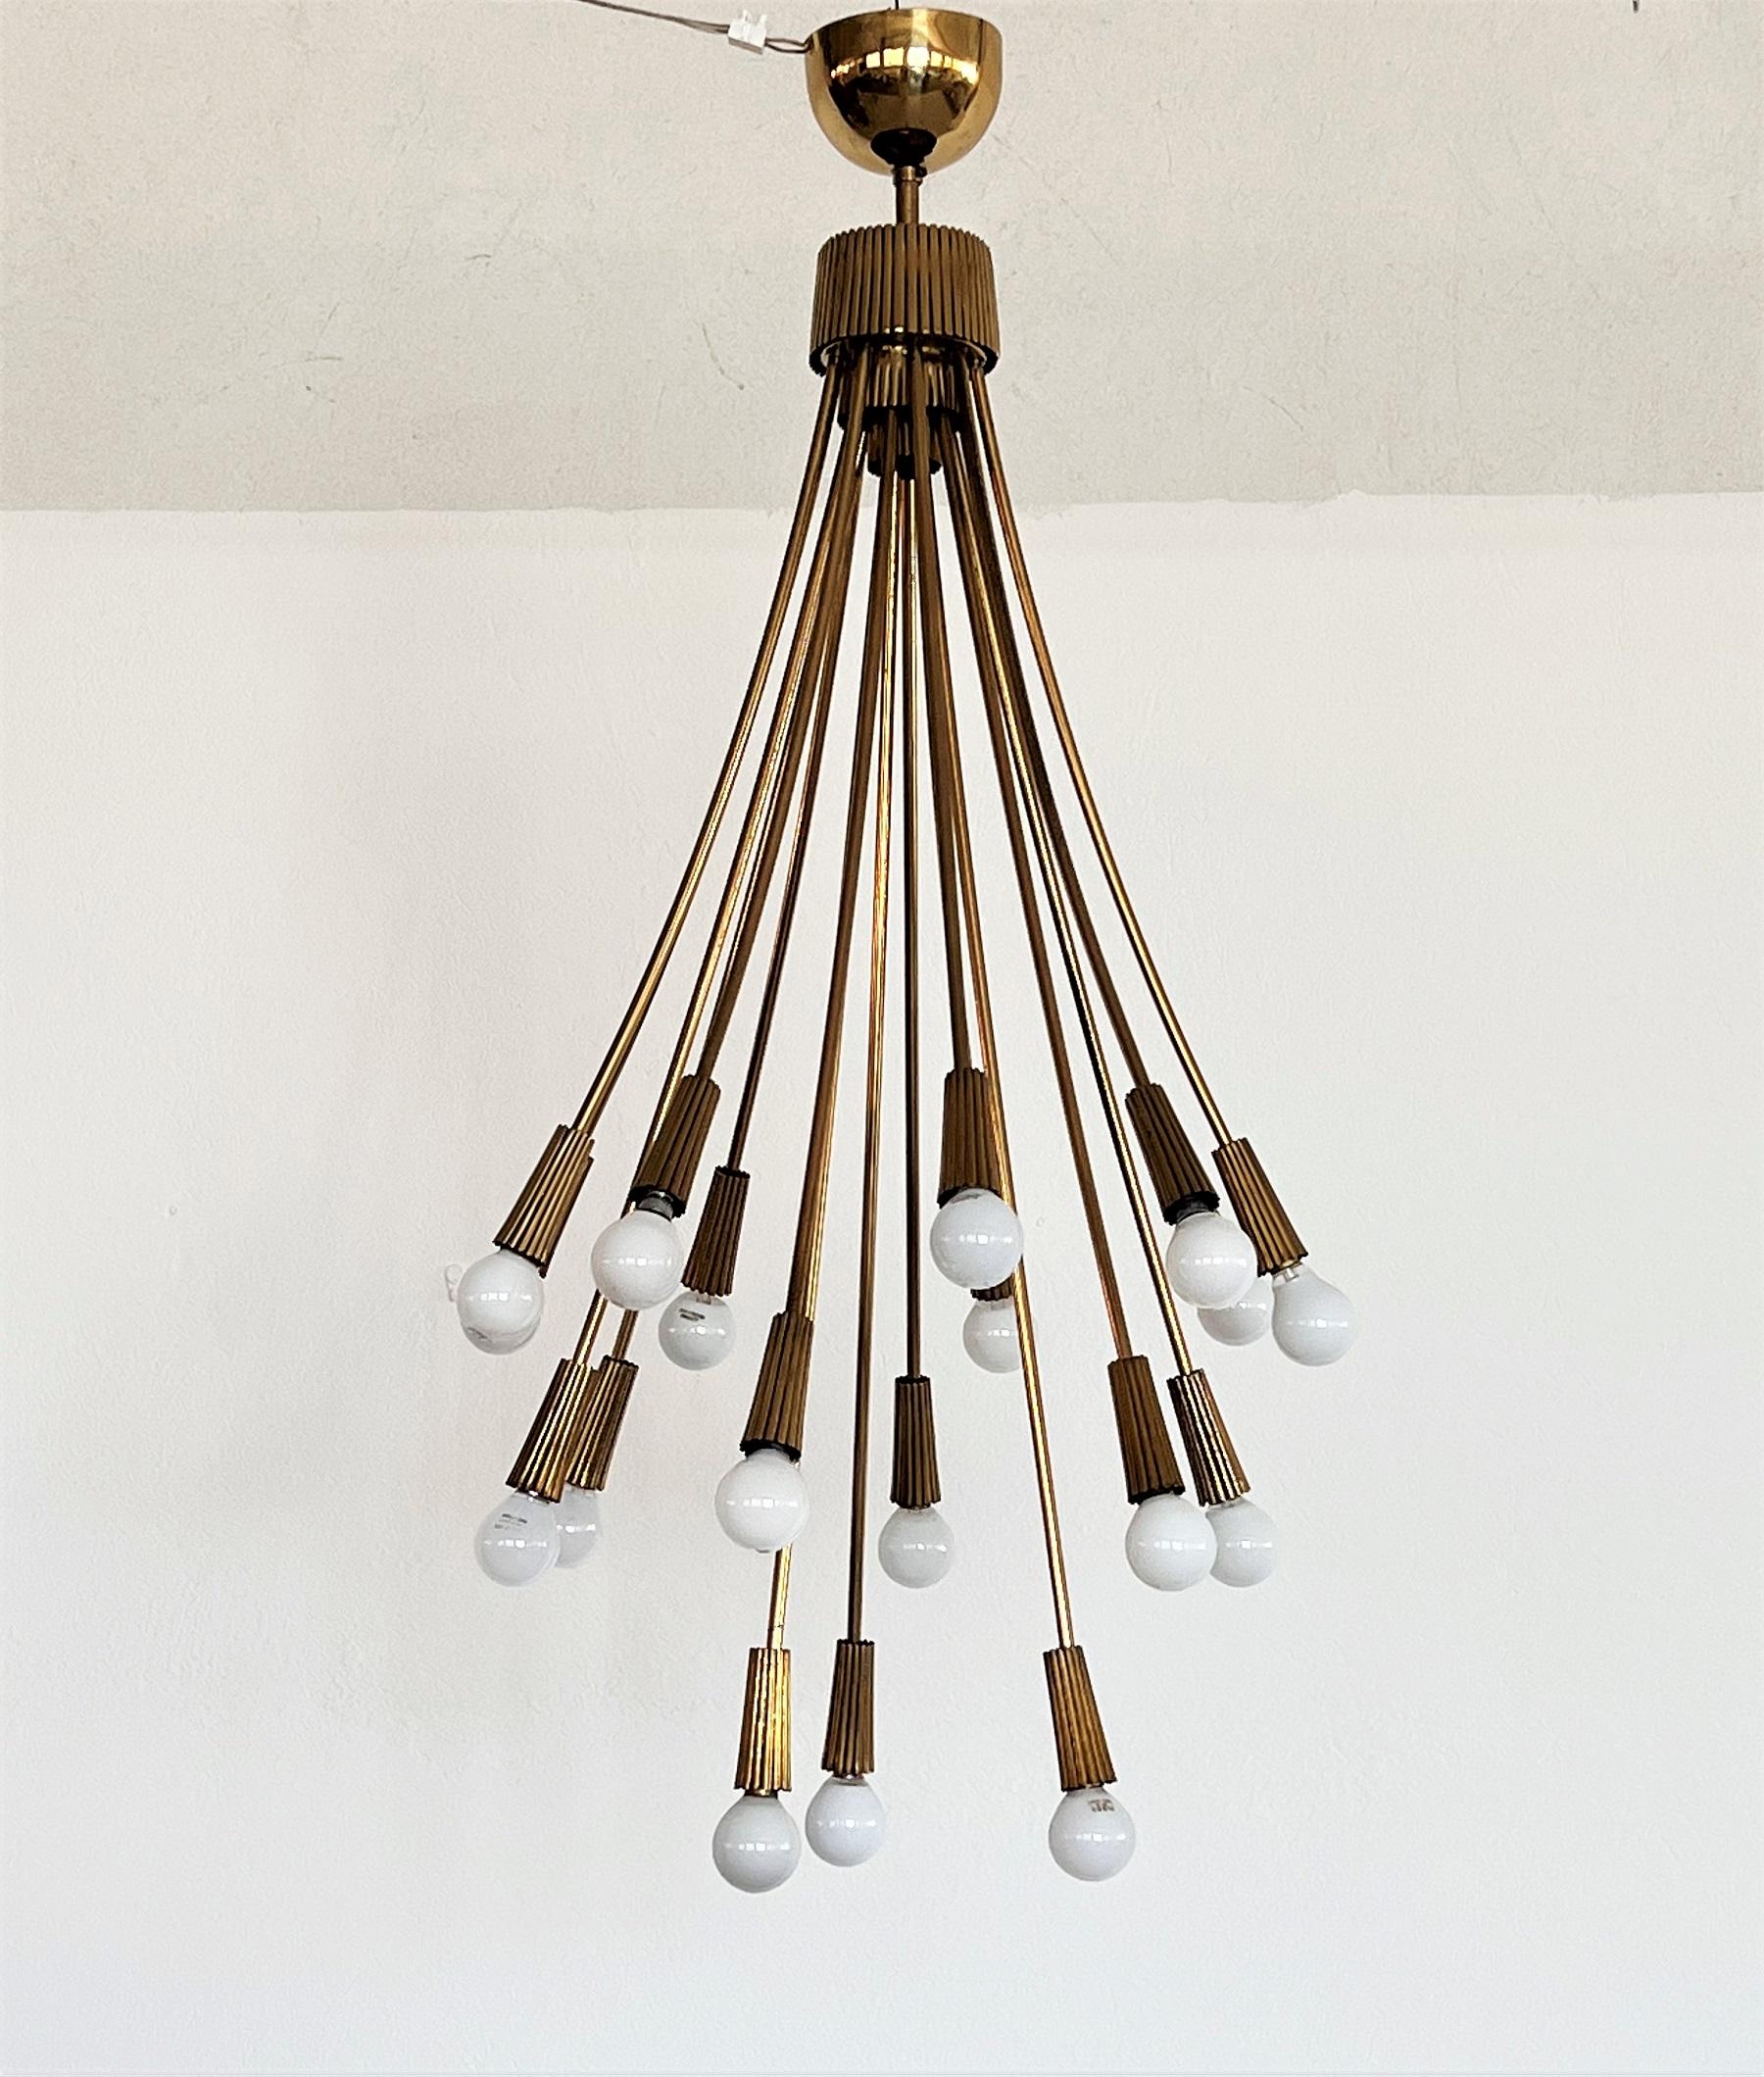 Italian Chandelier in Brass with 18 Lights, 1970s For Sale 1